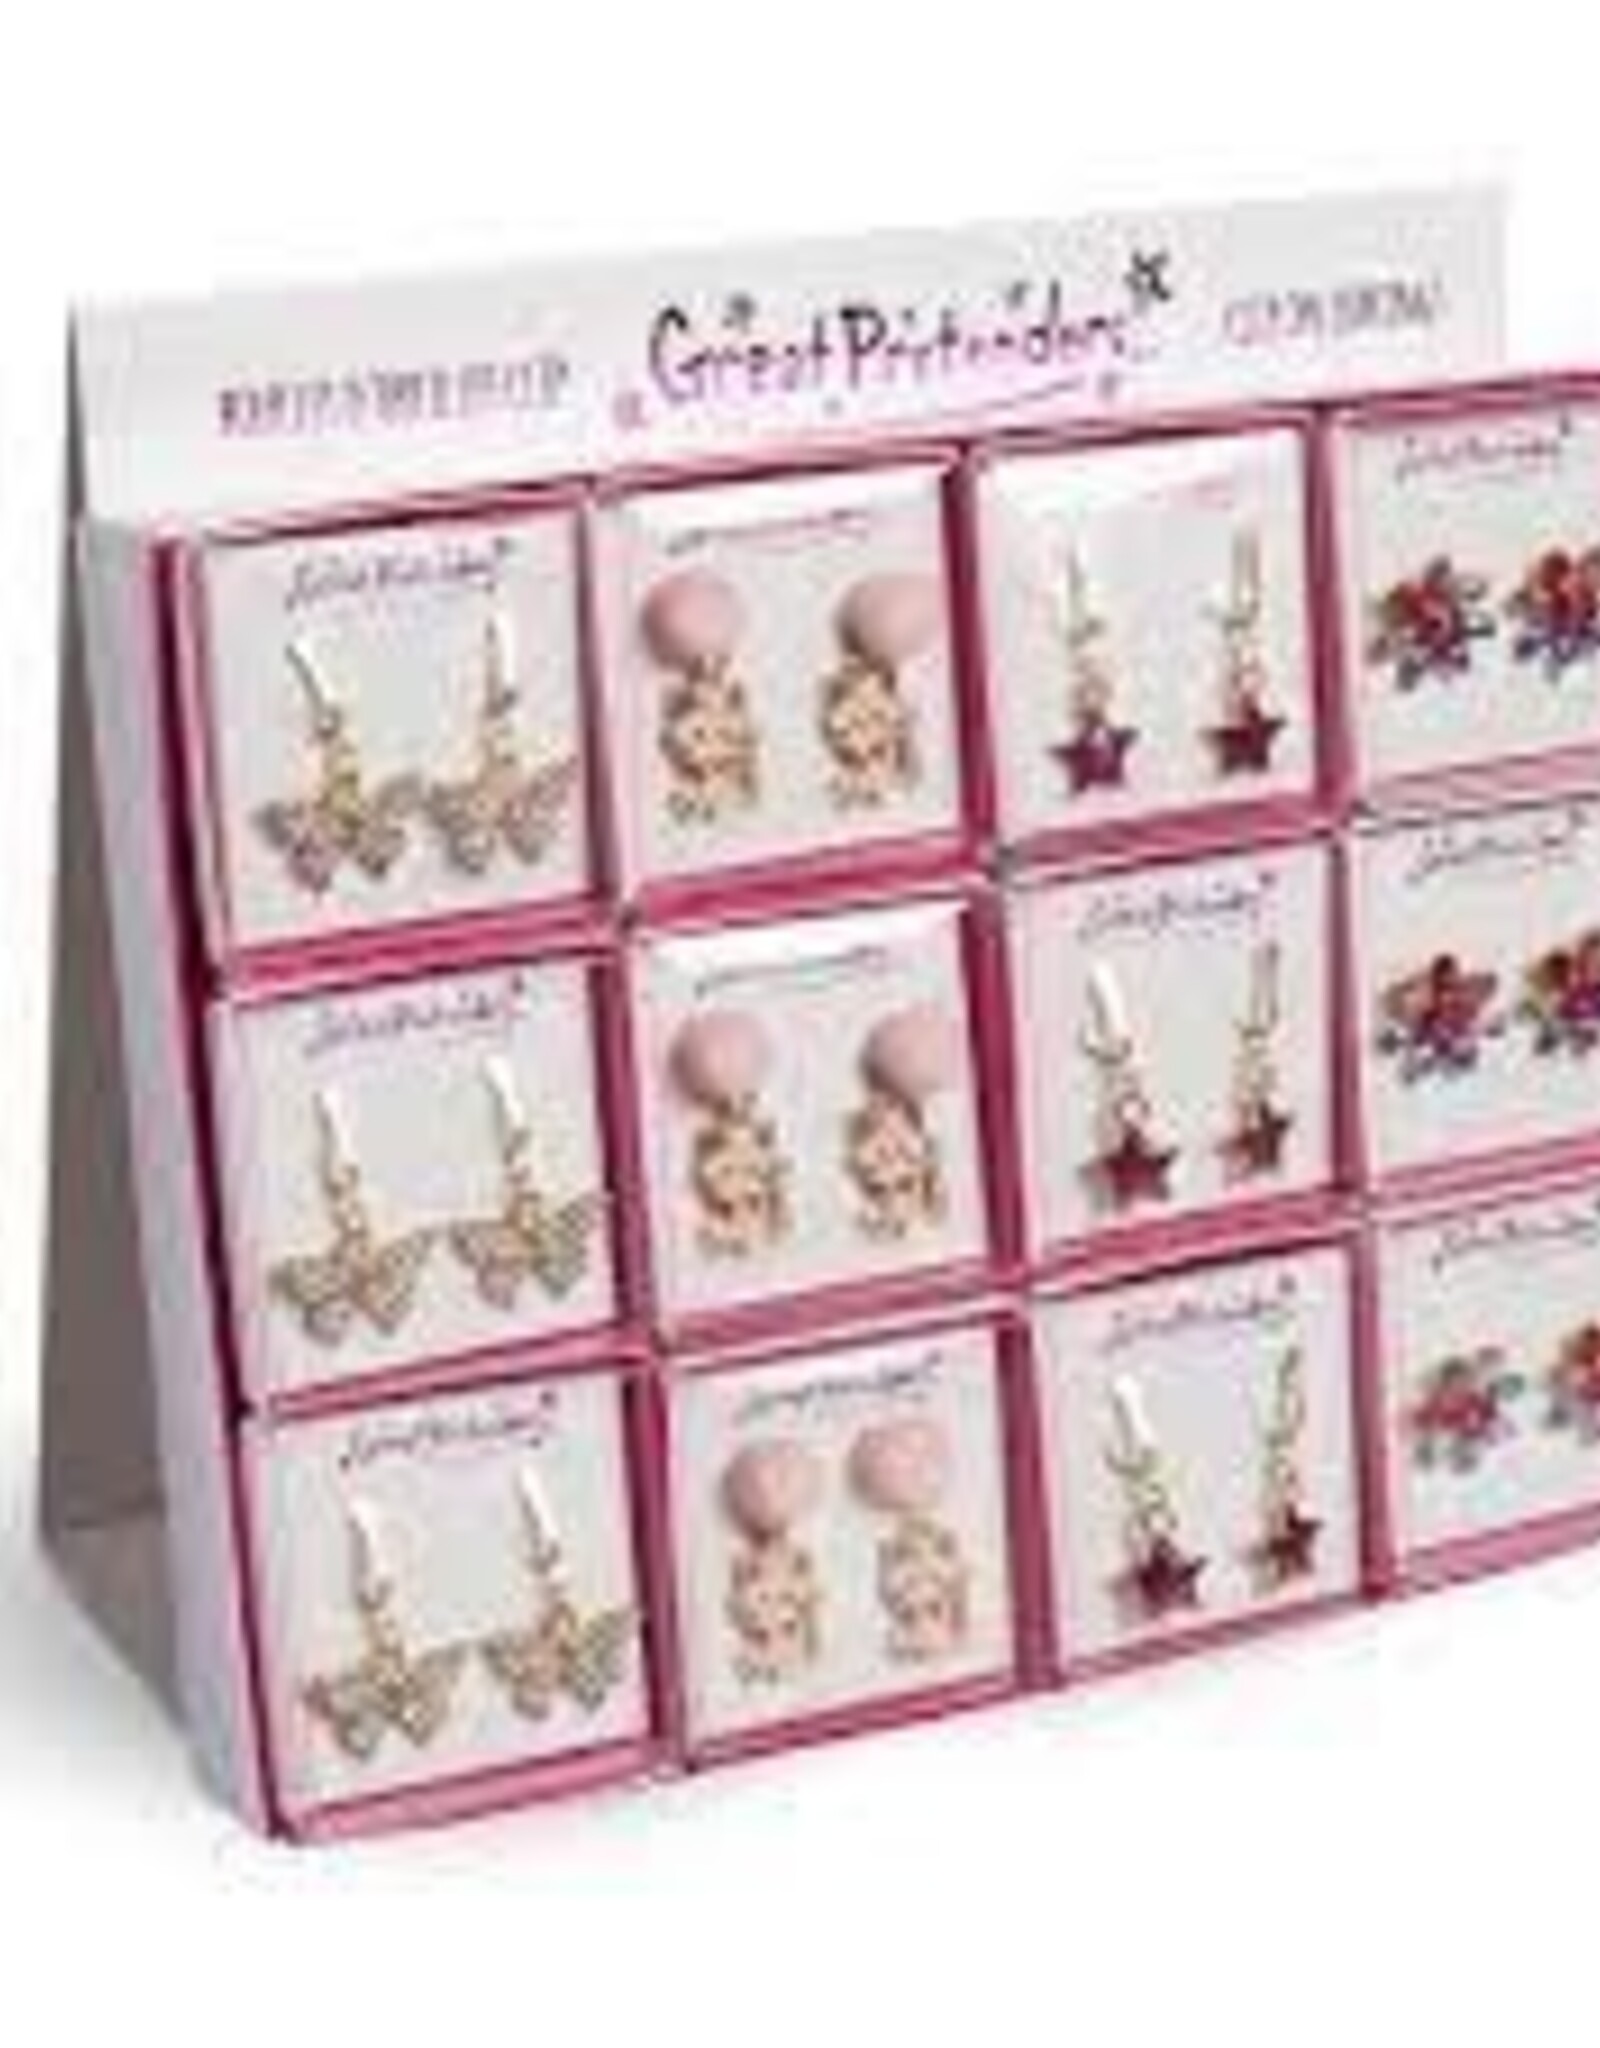 Great Pretenders Clip On Earrings, Assorted, PDQ Display, 24 Pcs